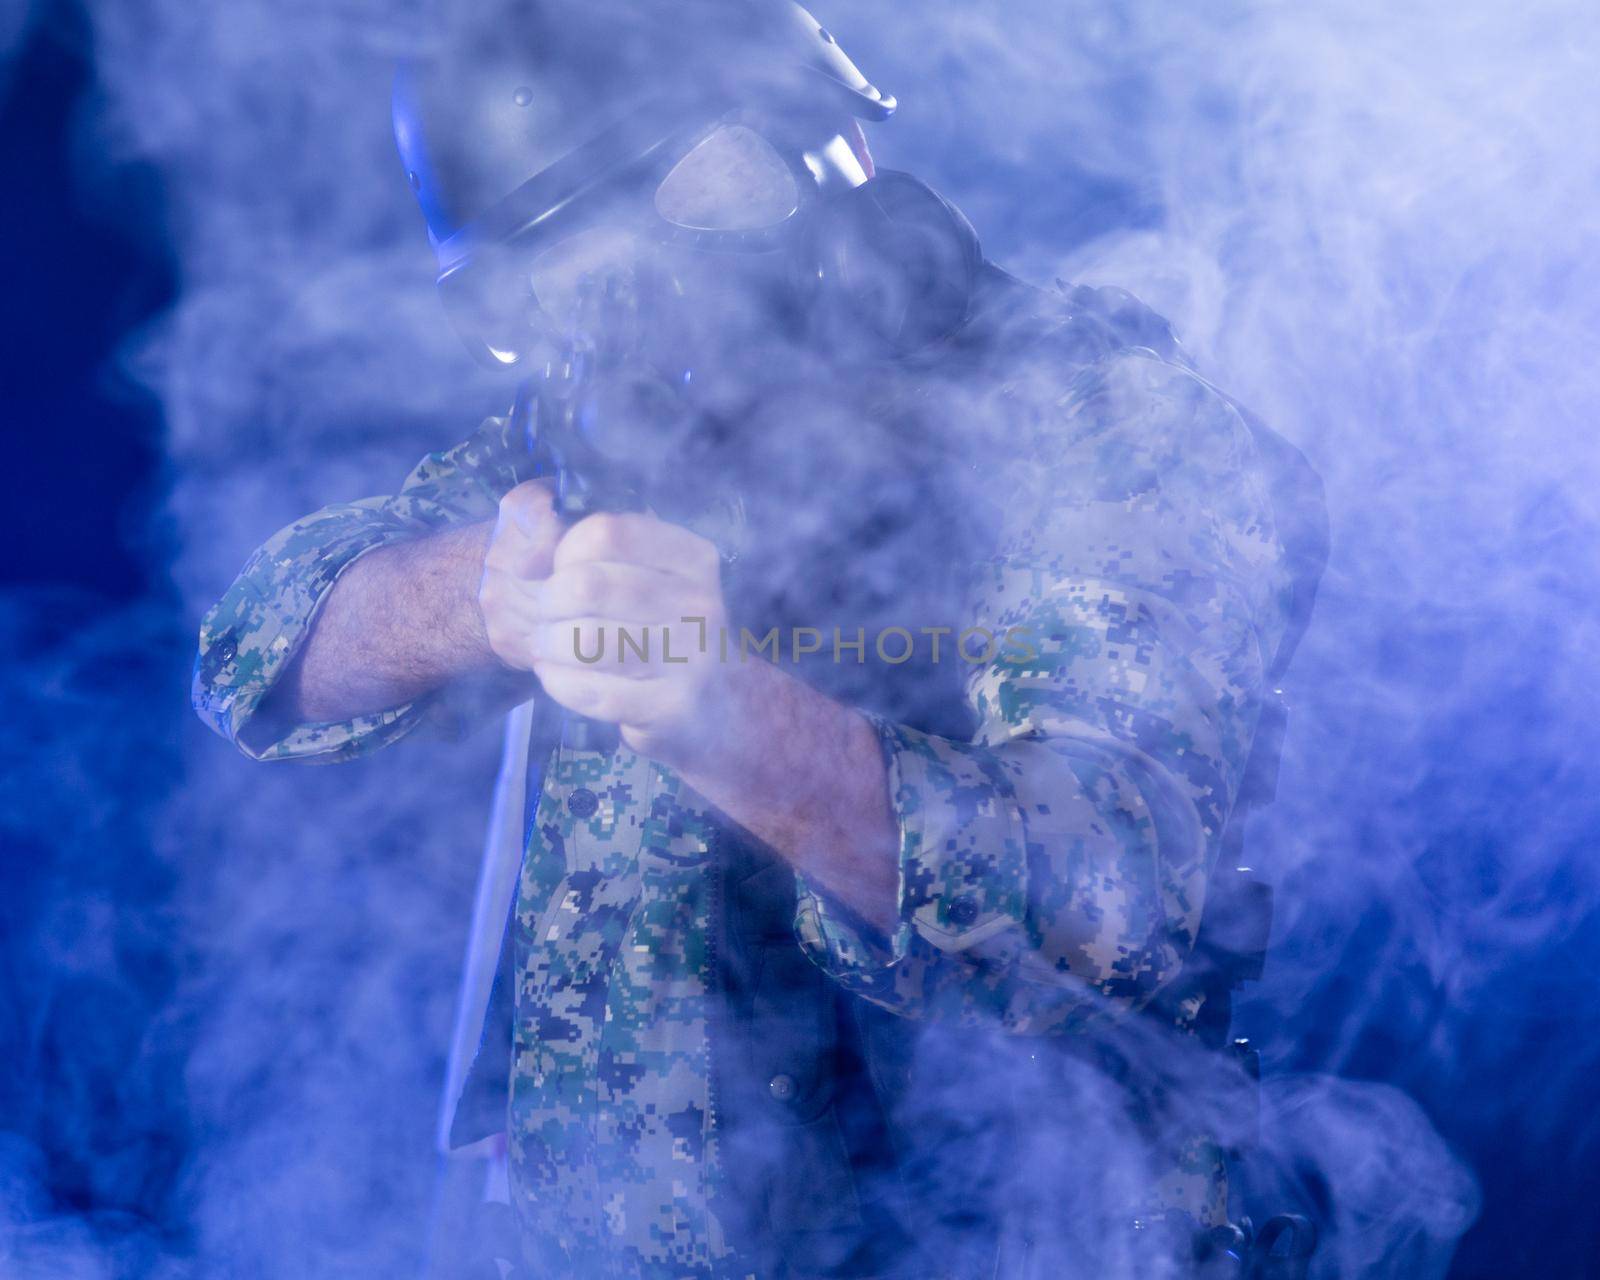 Soldier in army fatigues wearing gas mask holding assault rifle in haze of blue smoke